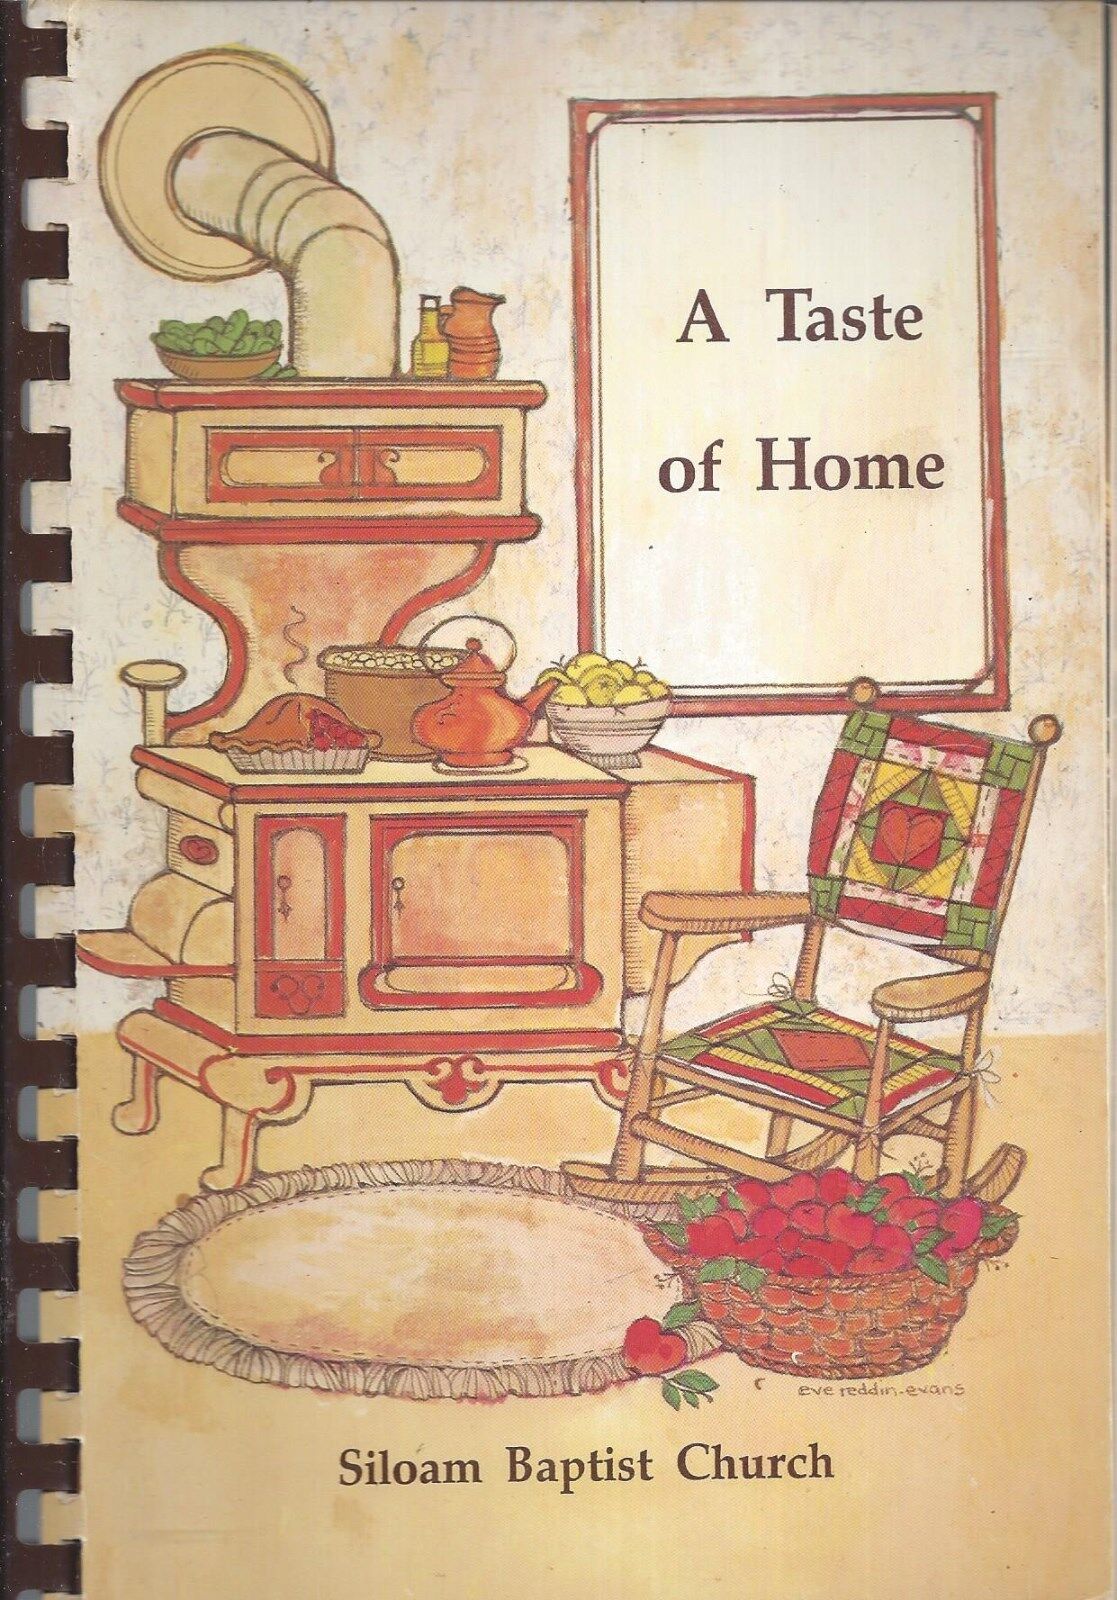 Meadville Ms 1988 Siloam Baptist Church Cook Book A Taste Of Home * Mississippi